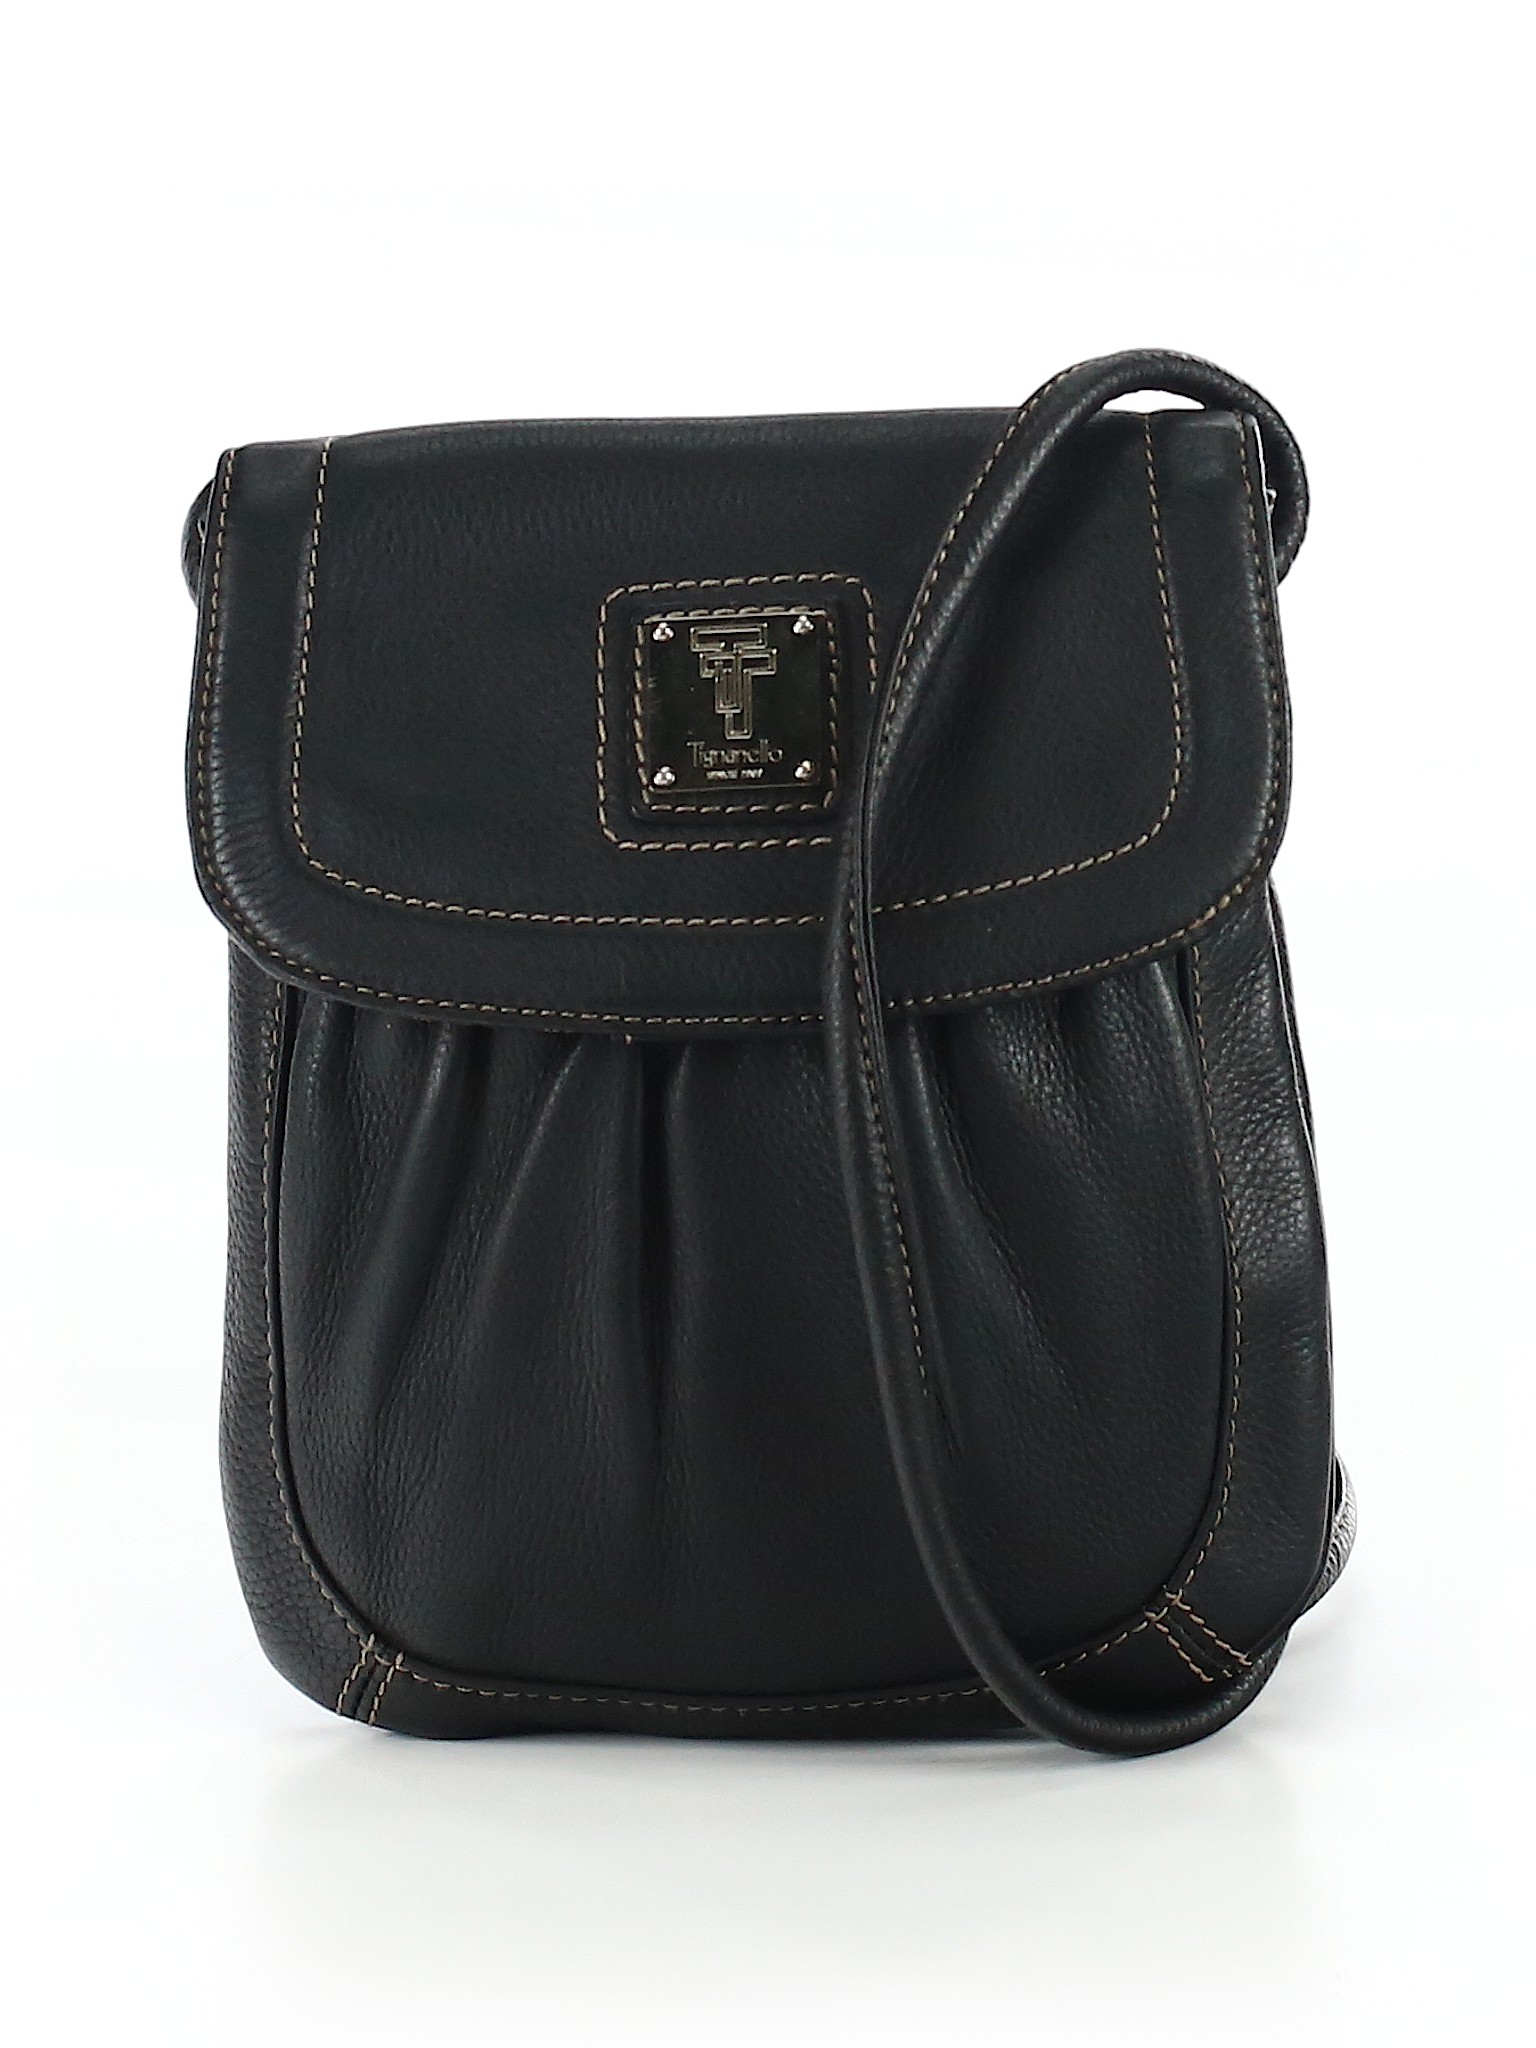 Tignanello 100% Leather Solid Black Leather Crossbody Bag One Size - 61% off | thredUP